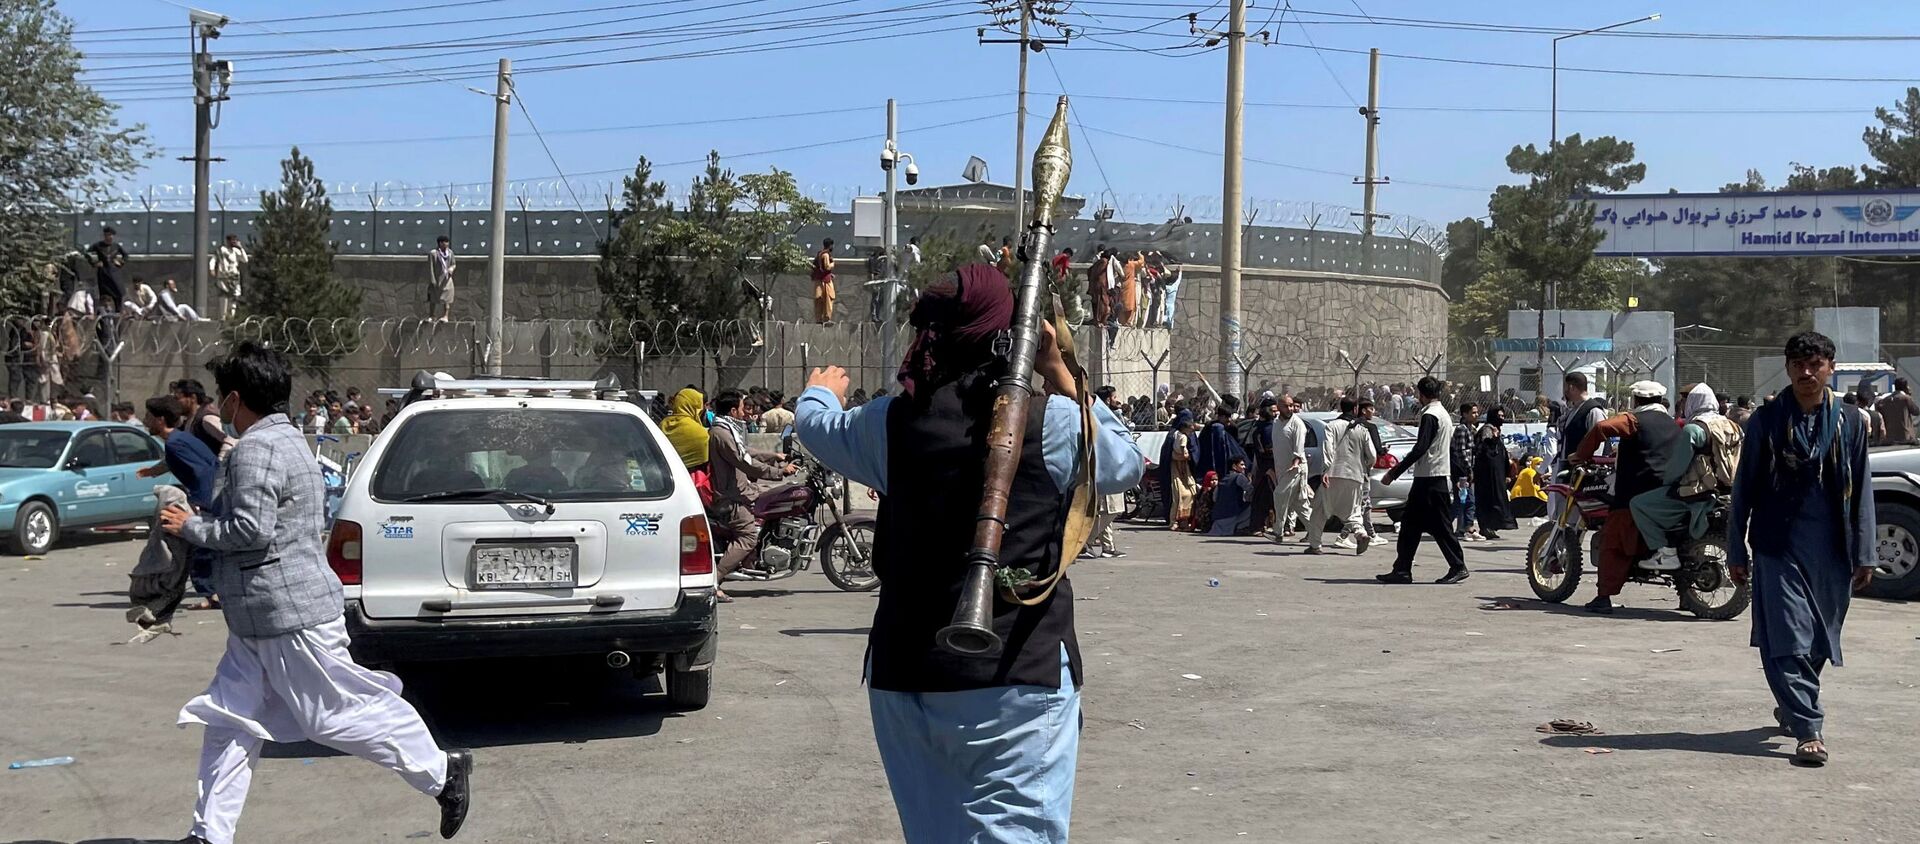 A member of Taliban forces inspects the area outside Hamid Karzai International Airport in Kabul, Afghanistan August 16, 2021 - Sputnik International, 1920